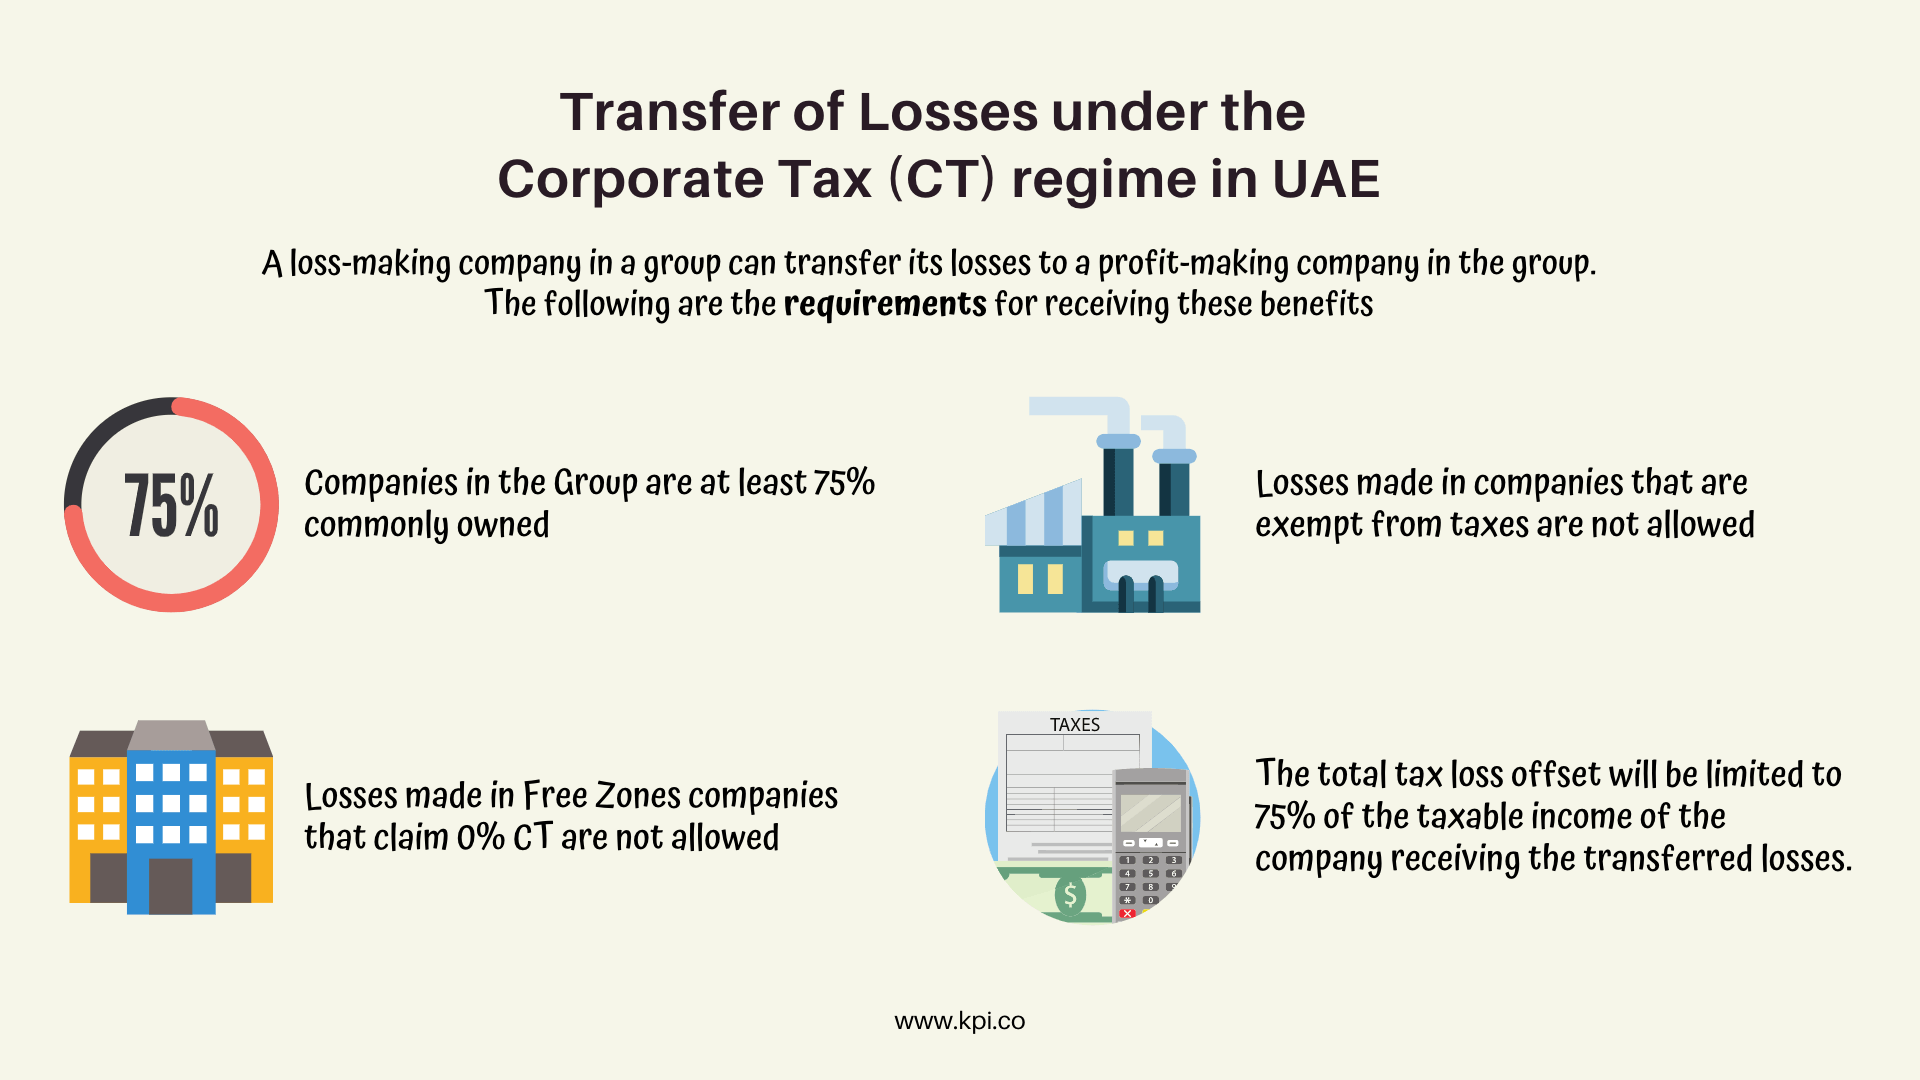 Infographic on requirements for Transfer of Losses in the UAE Corporate Tax regime